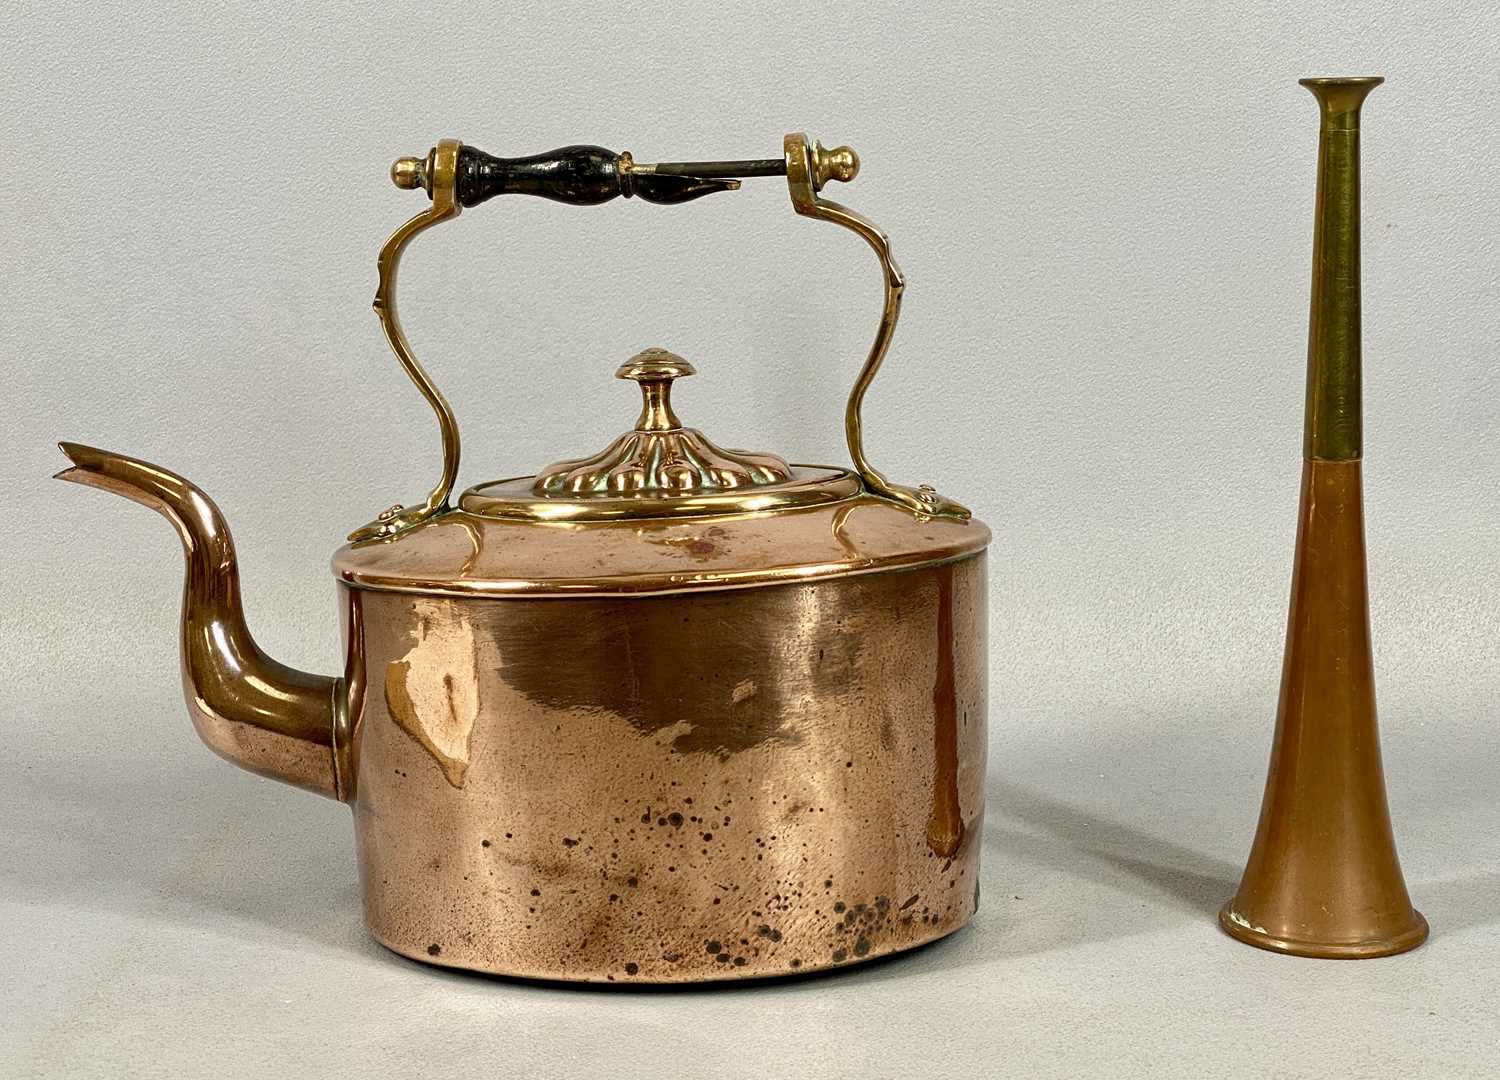 EARLY 20TH CENTURY METALWARE, oval copper kettle with turned wood handle, 23cms (h) and a copper and